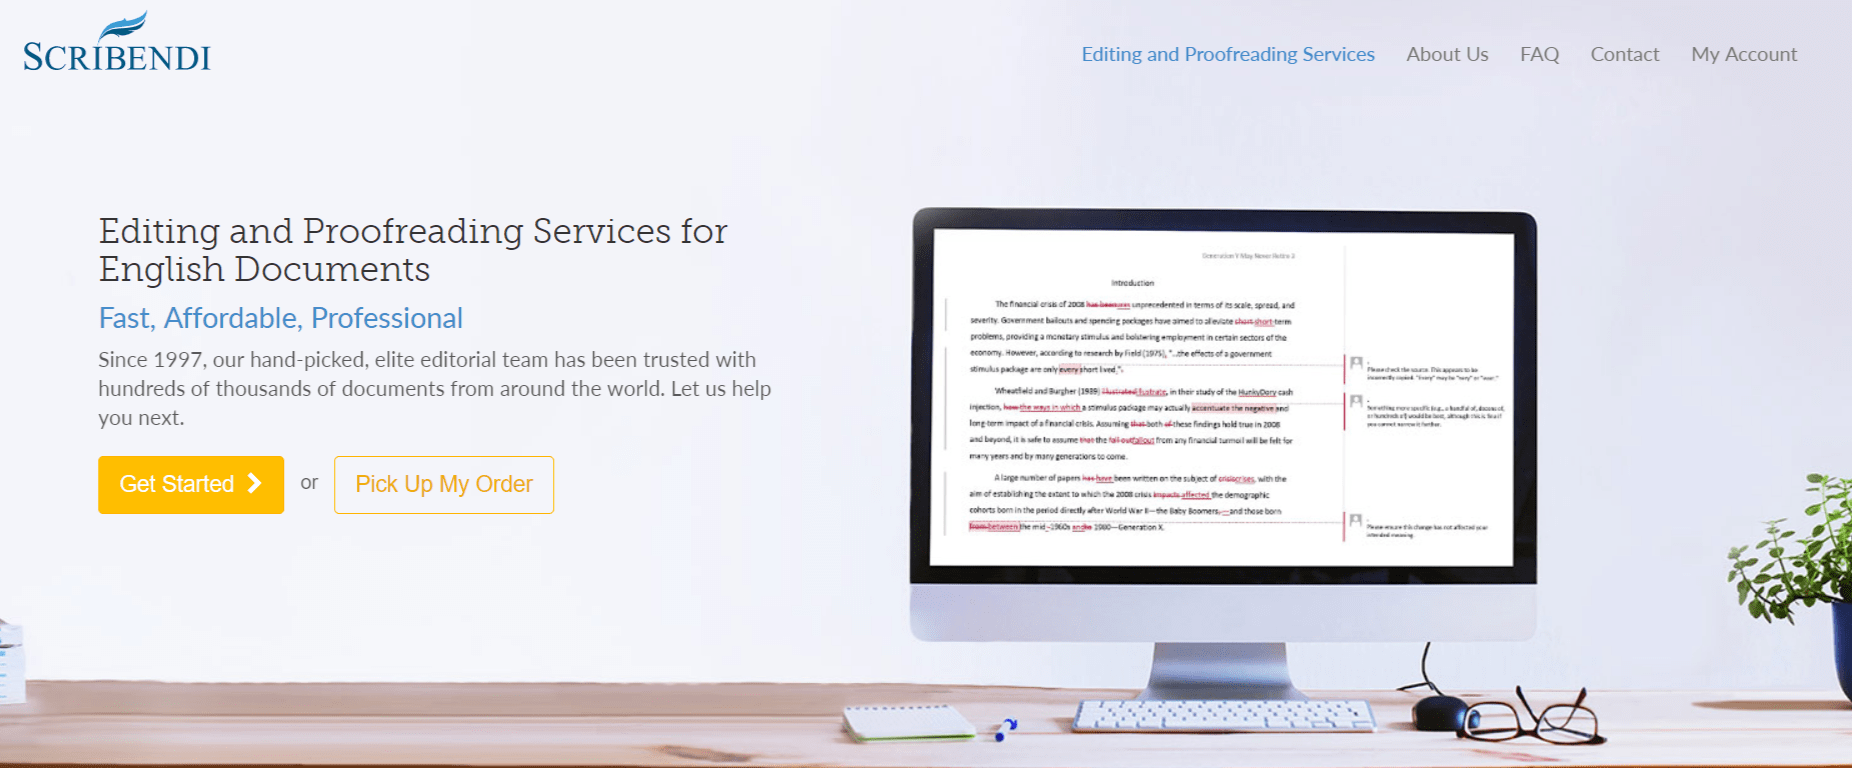  Scribendi Review- Proofreading Services Editing Services 